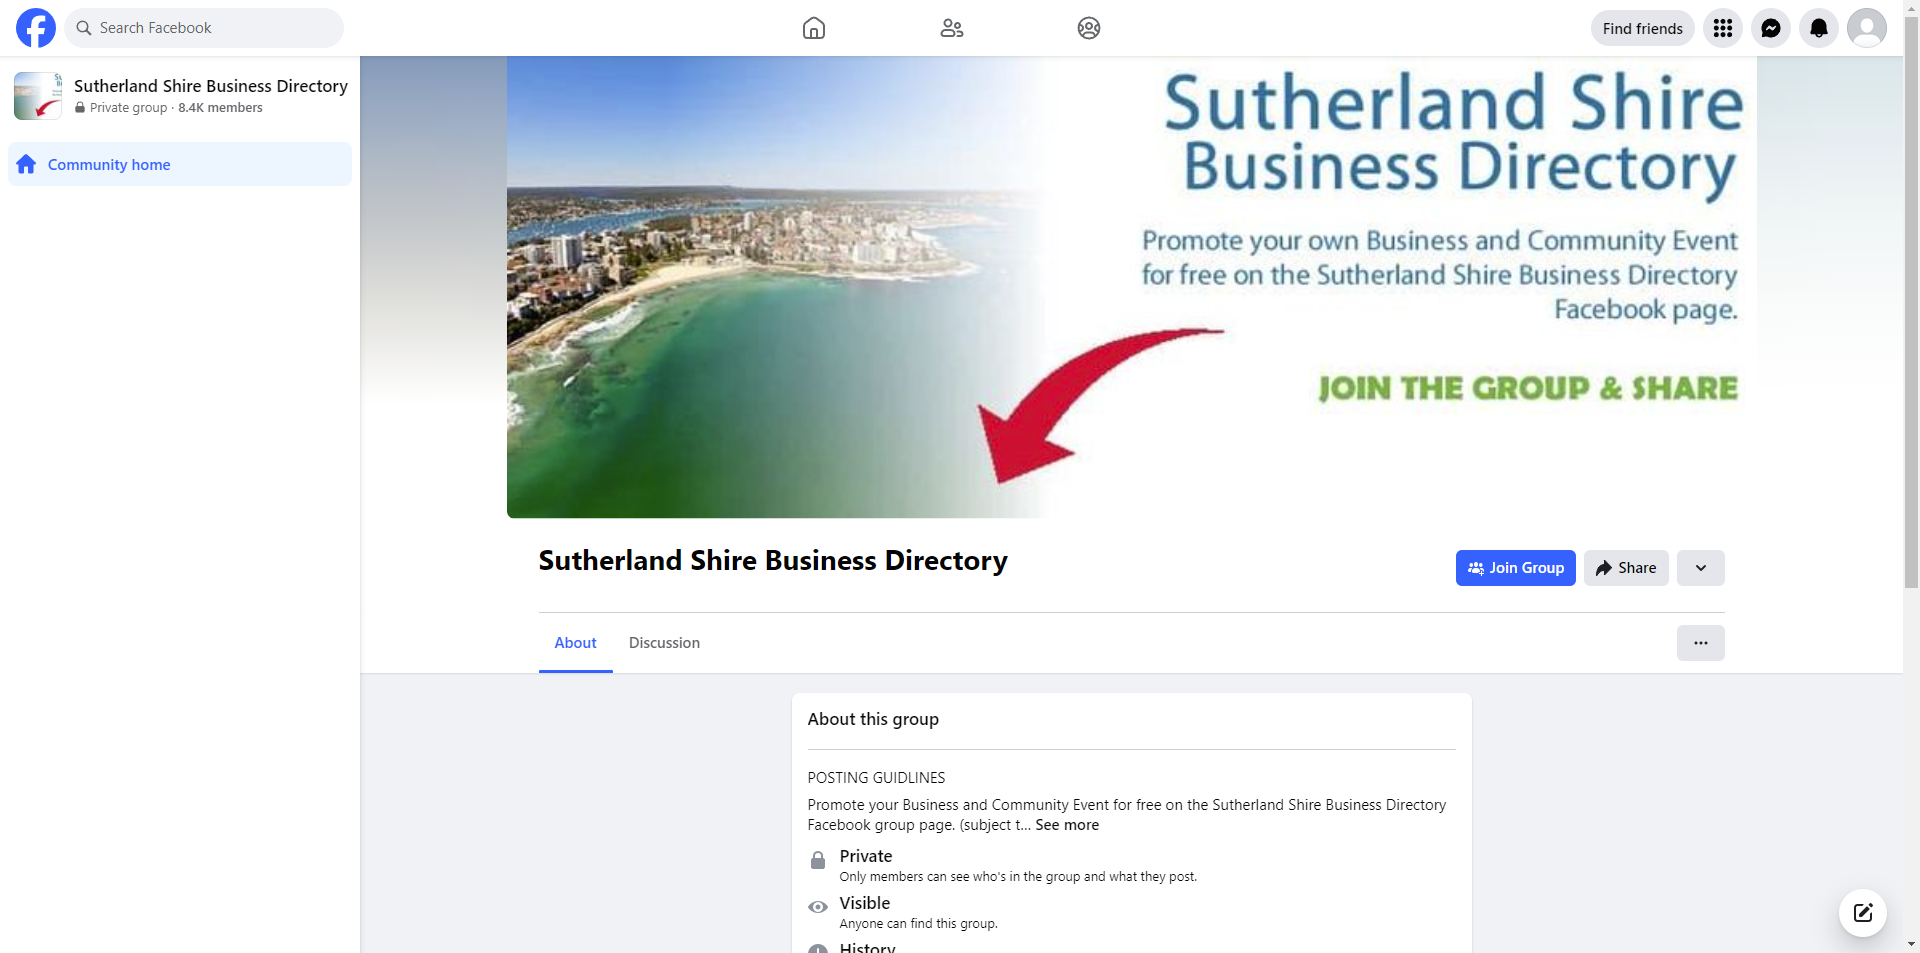 Sutherland Shire Business Directory